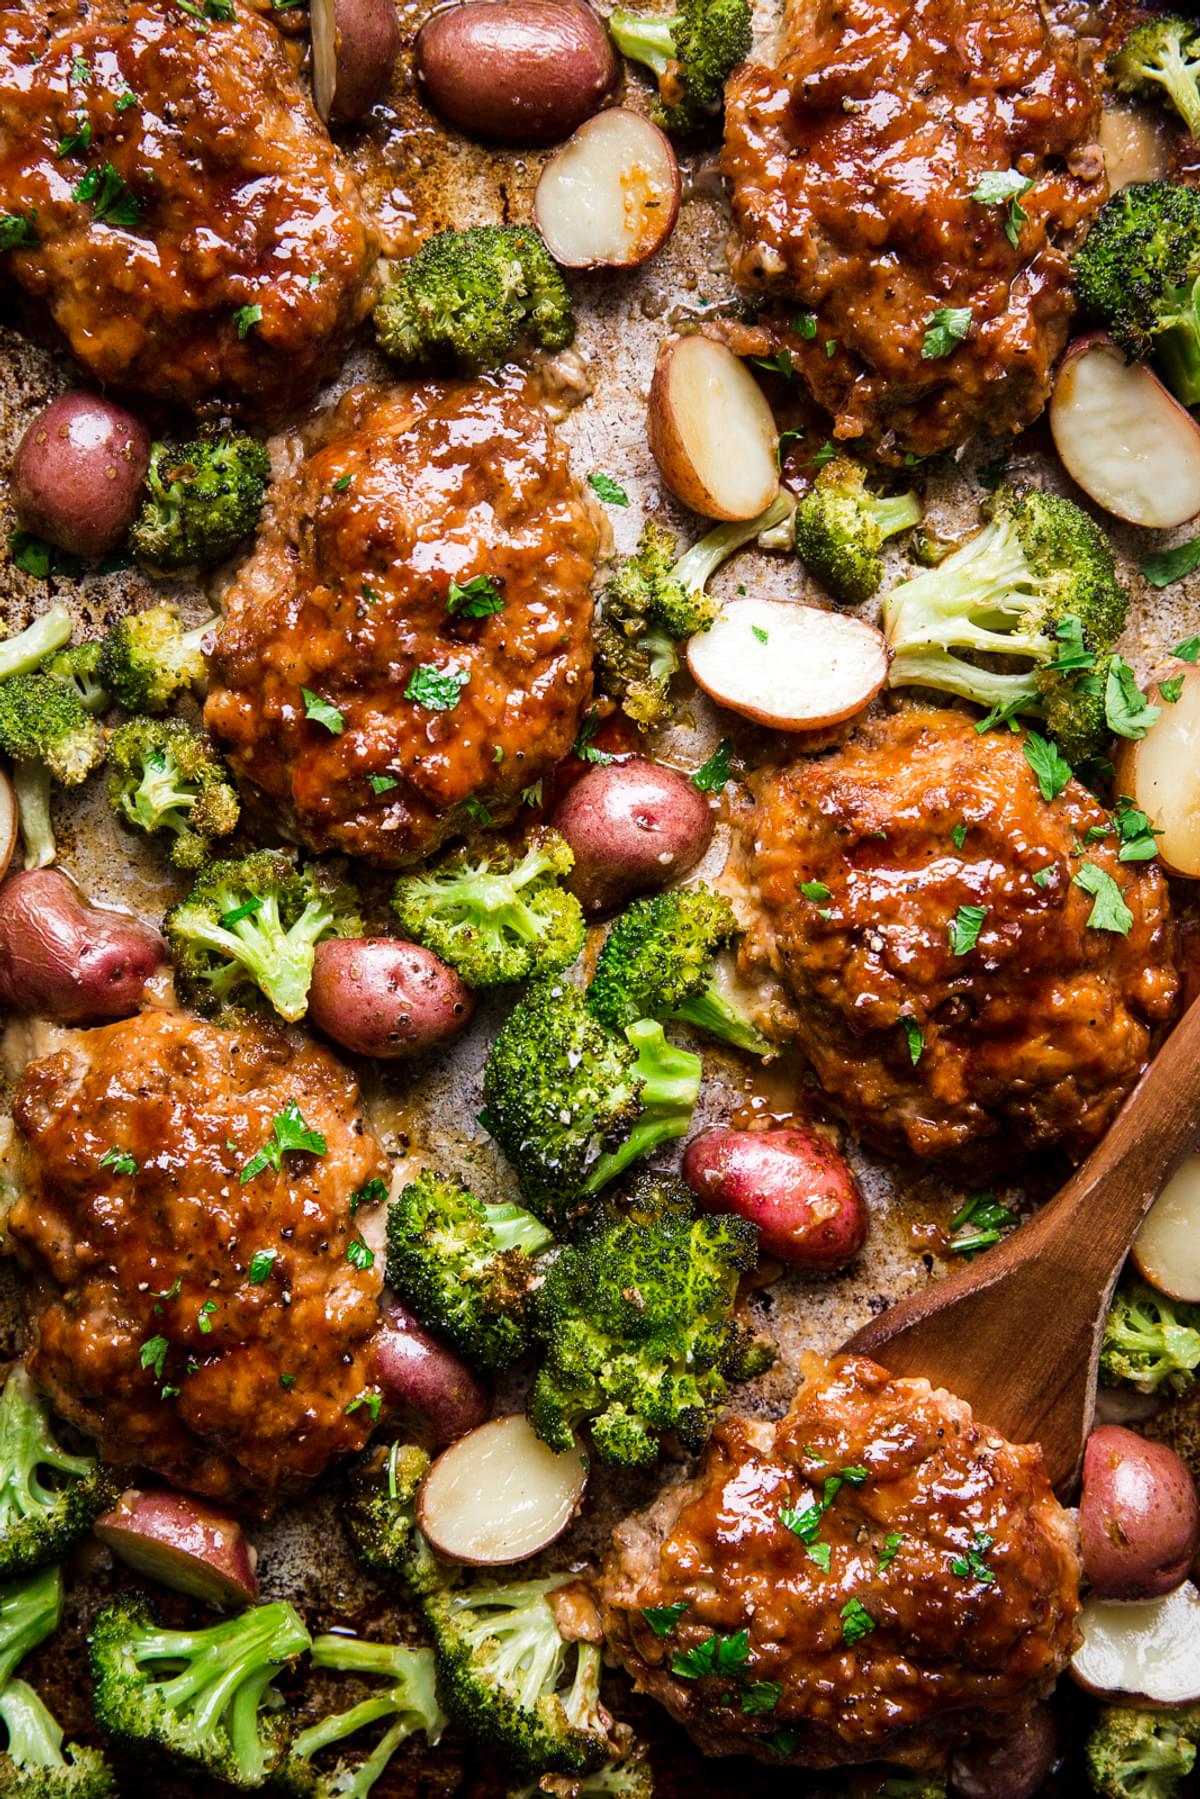 Italian-style meatloaf sheetpan with broccoli and potatoes shown with wooden spatula